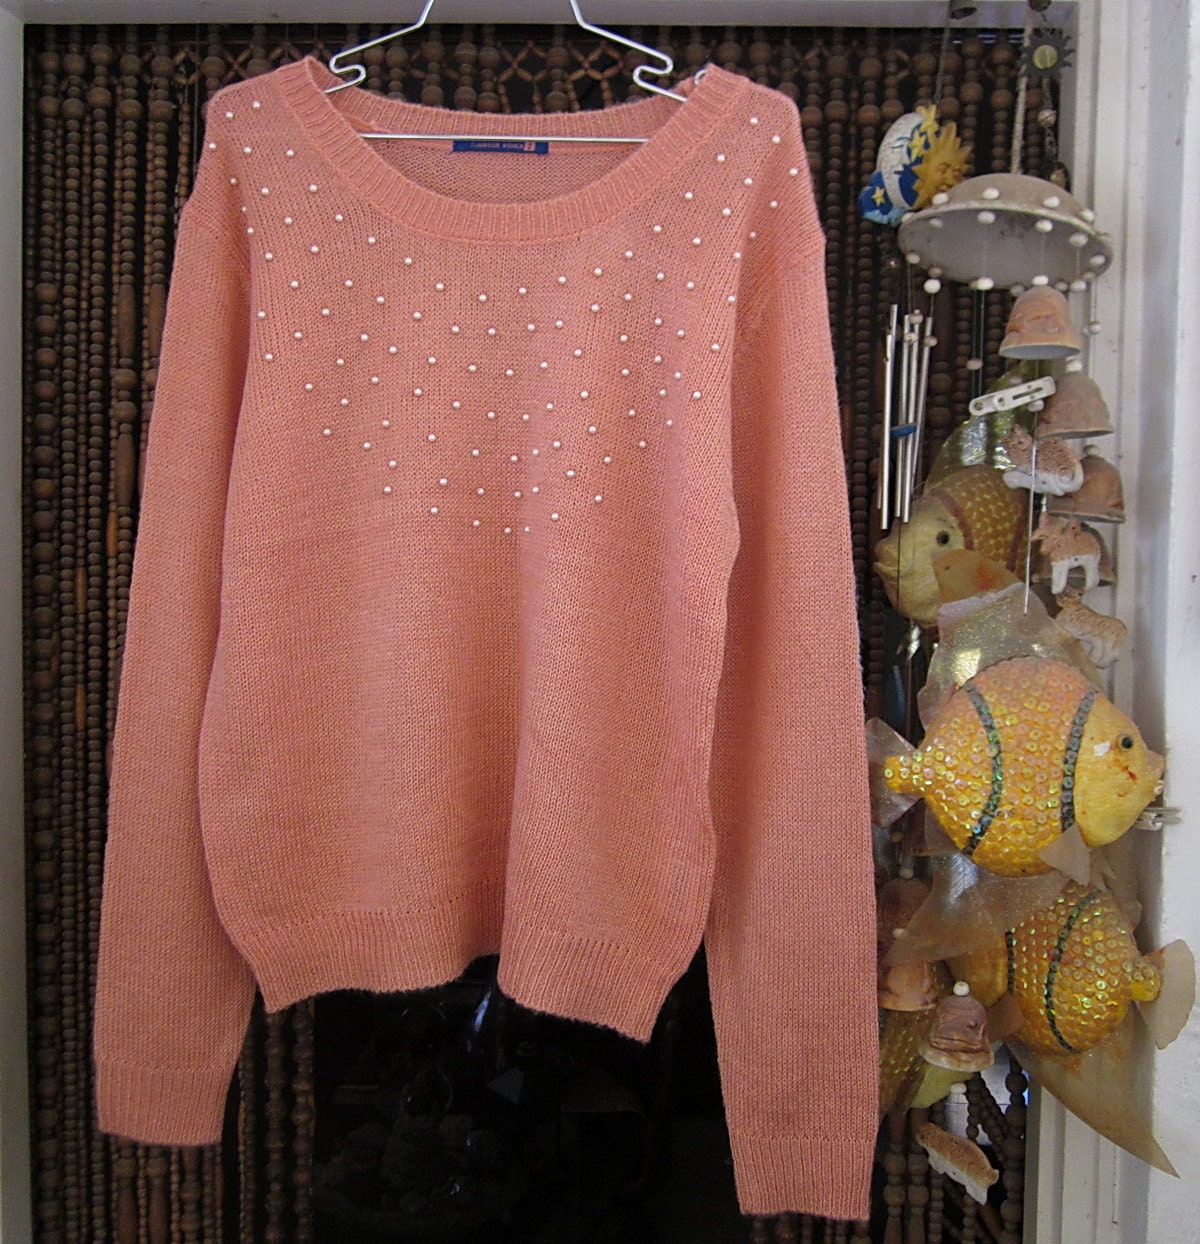 Peach Knit Sweater Adorned with Faux Pearls Vintage - Etsy Polska